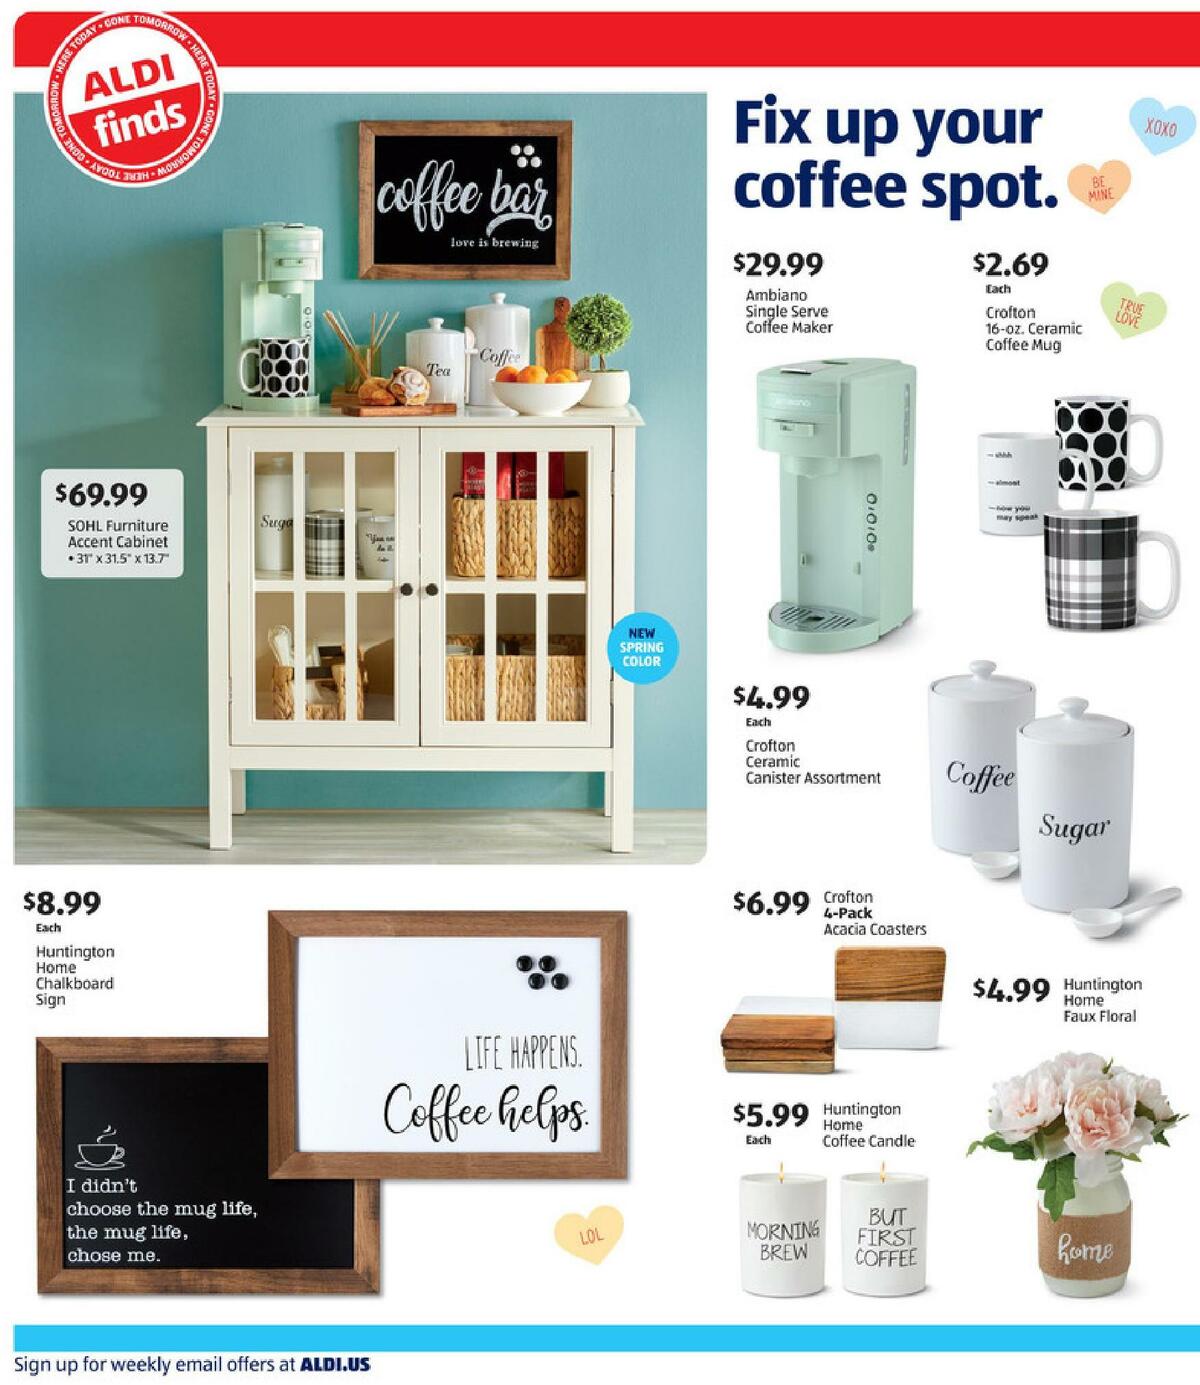 ALDI In Store Ad Weekly Ad from February 7